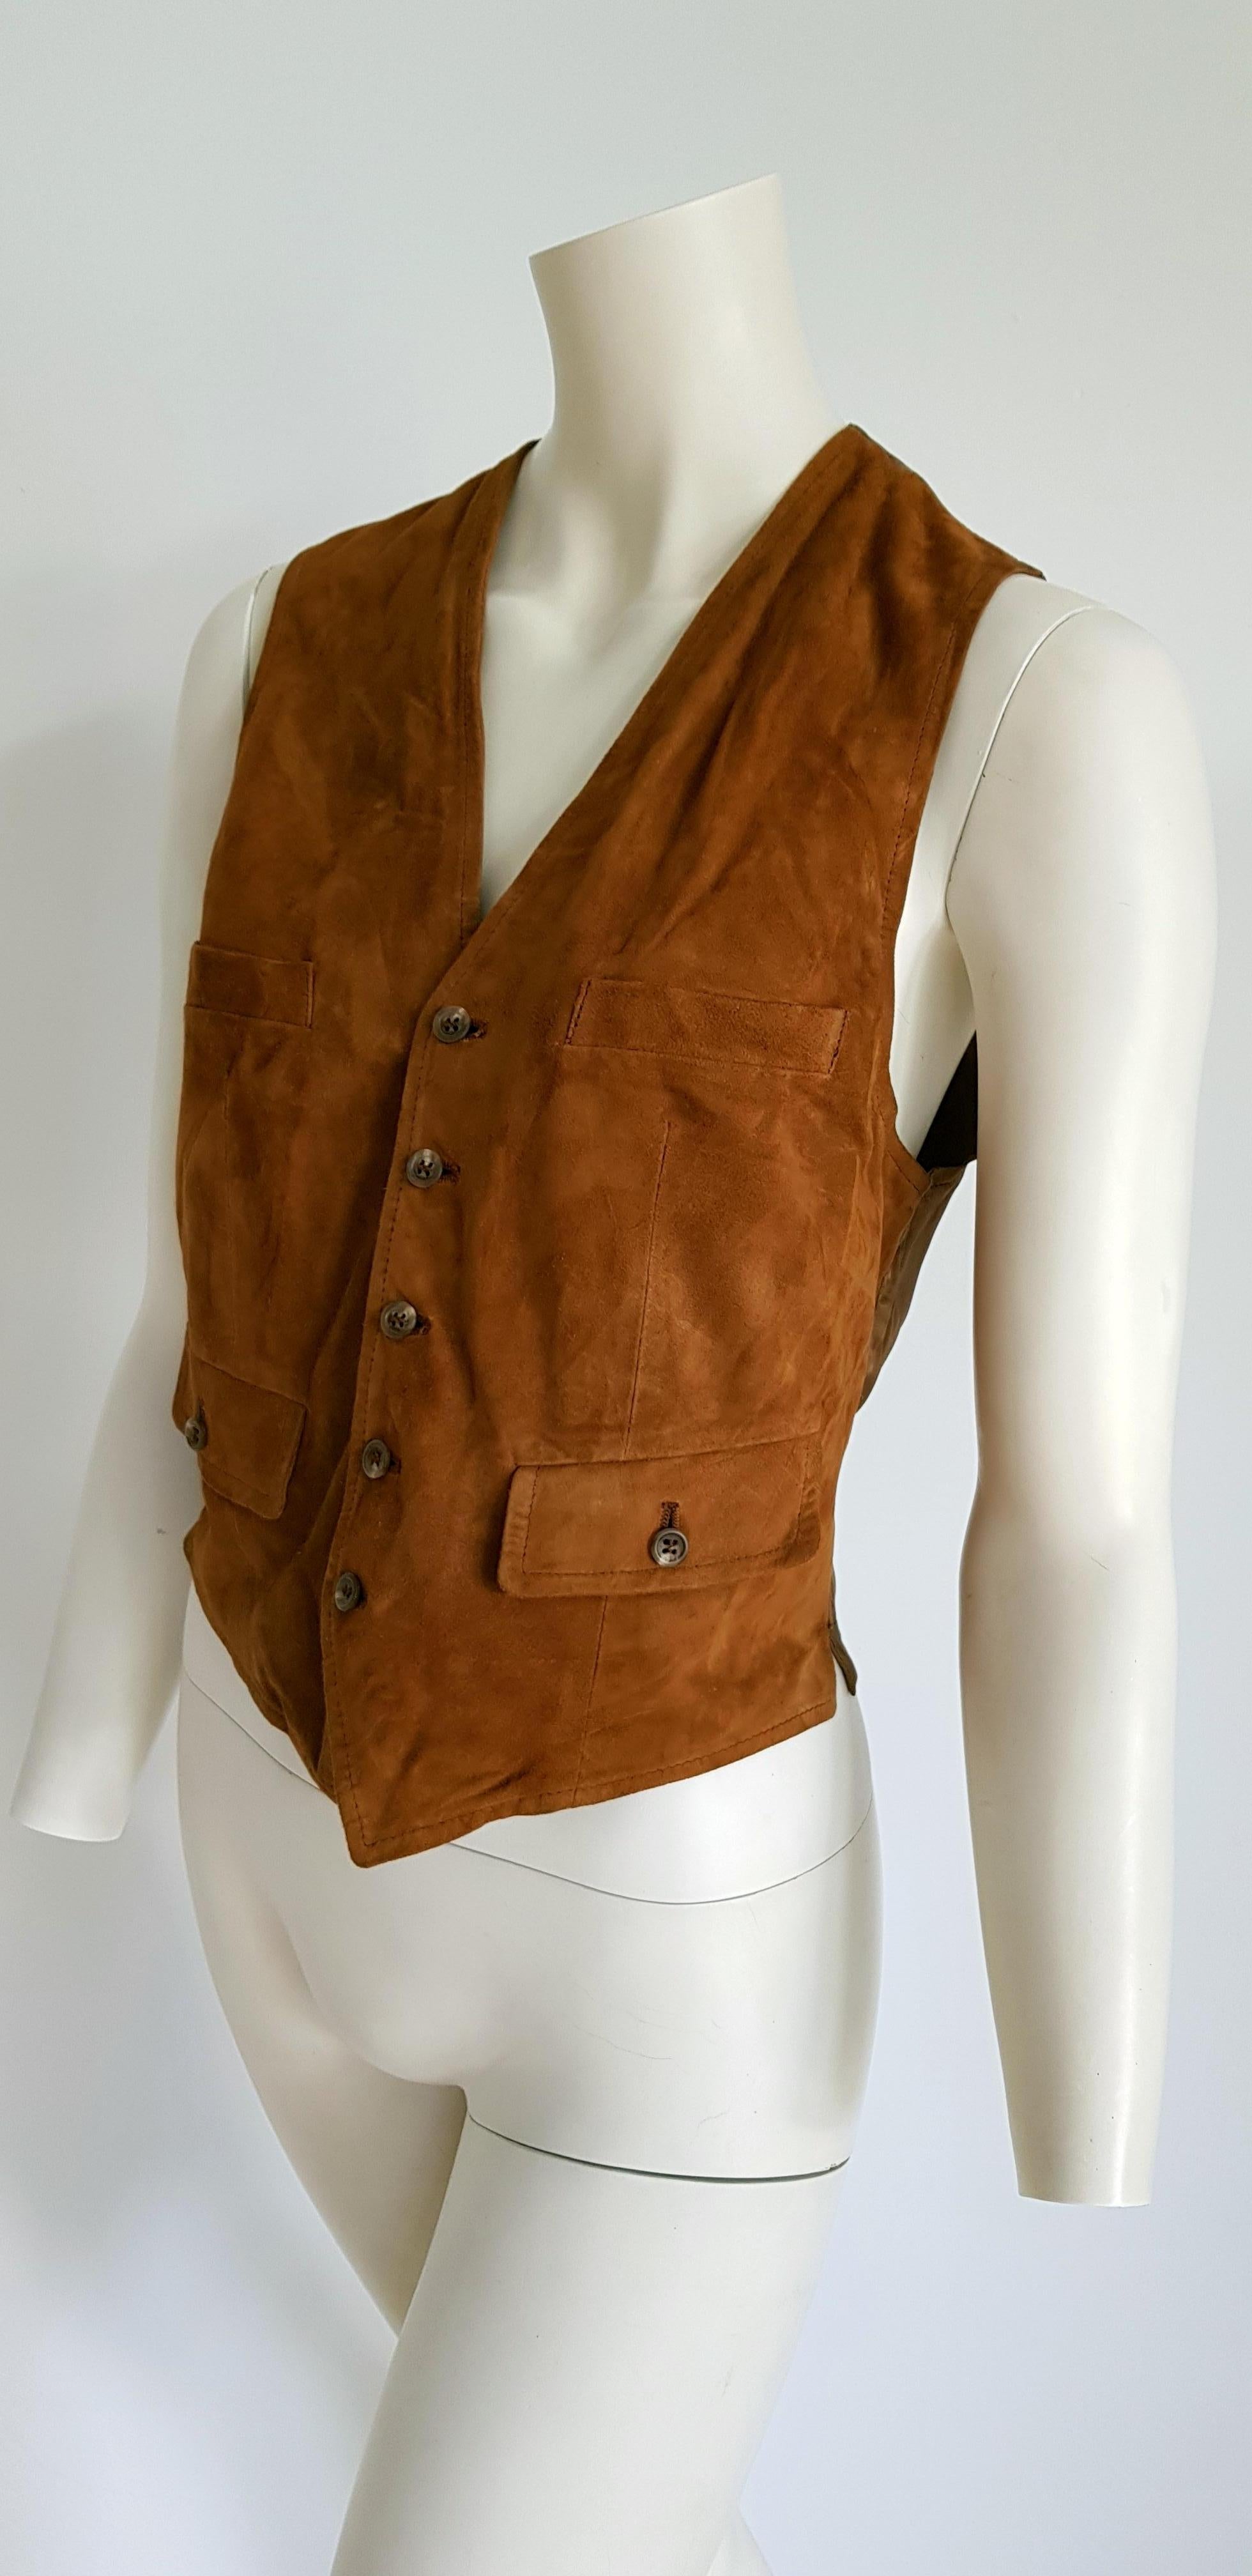 RALPH LAUREN brown suede vest gilet - Unworn, New
..
SIZE: equivalent to about Small / Medium, please review approx measurements as follows in cm: lenght 51, chest underarm to underarm 50, bust circumference 90, waist circumference 82.
TO CONVERT: